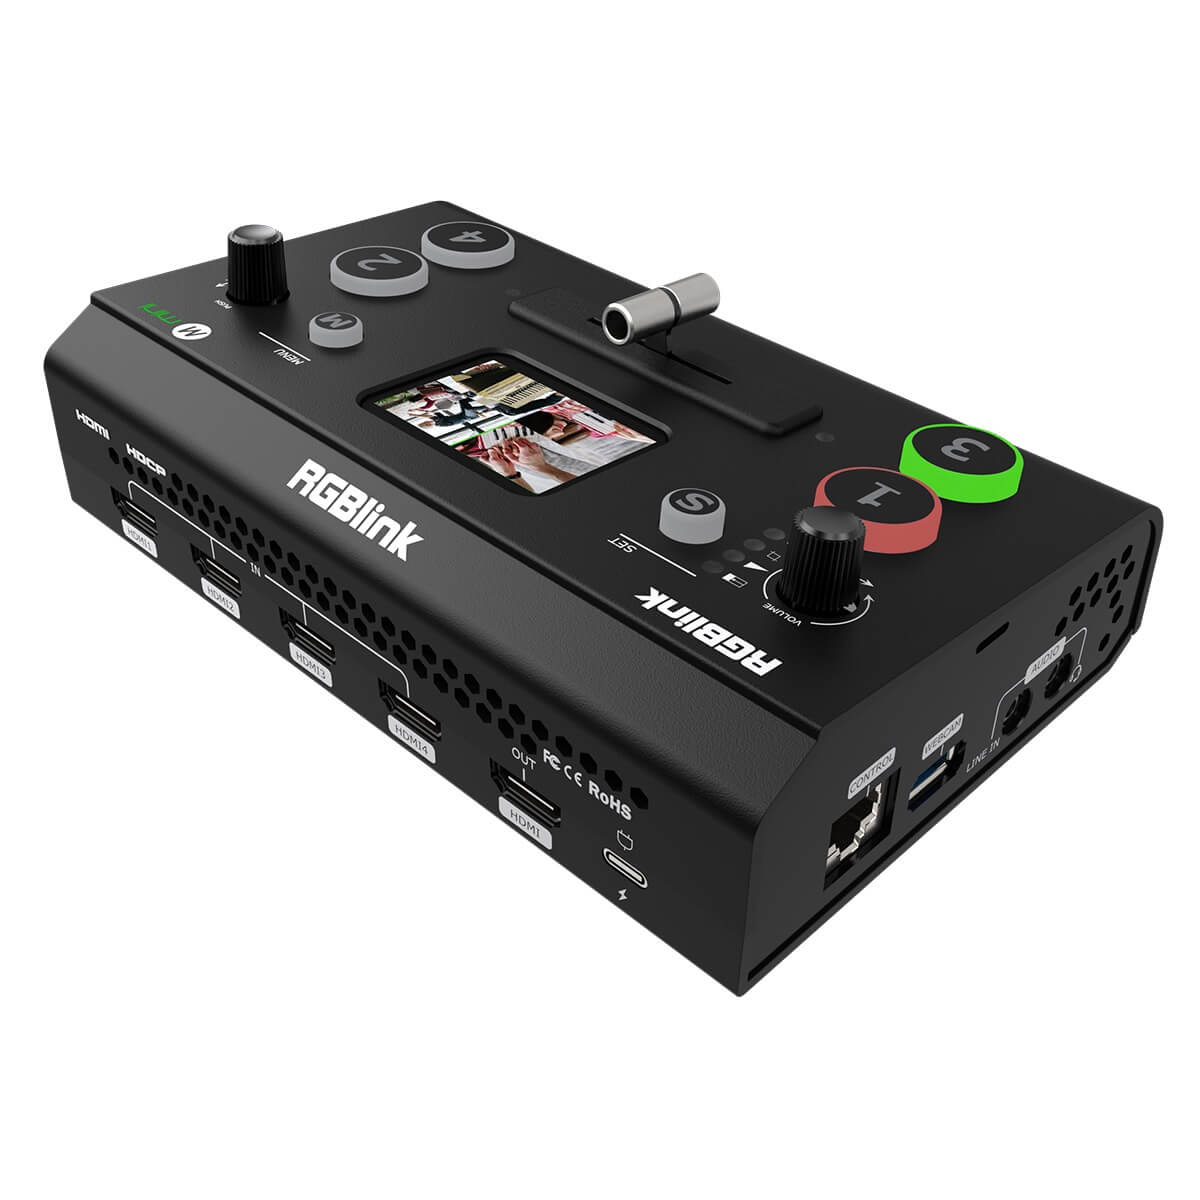 RGBlink mini (gen 2) - Compact Streaming Switcher with 4 HDMI inputs